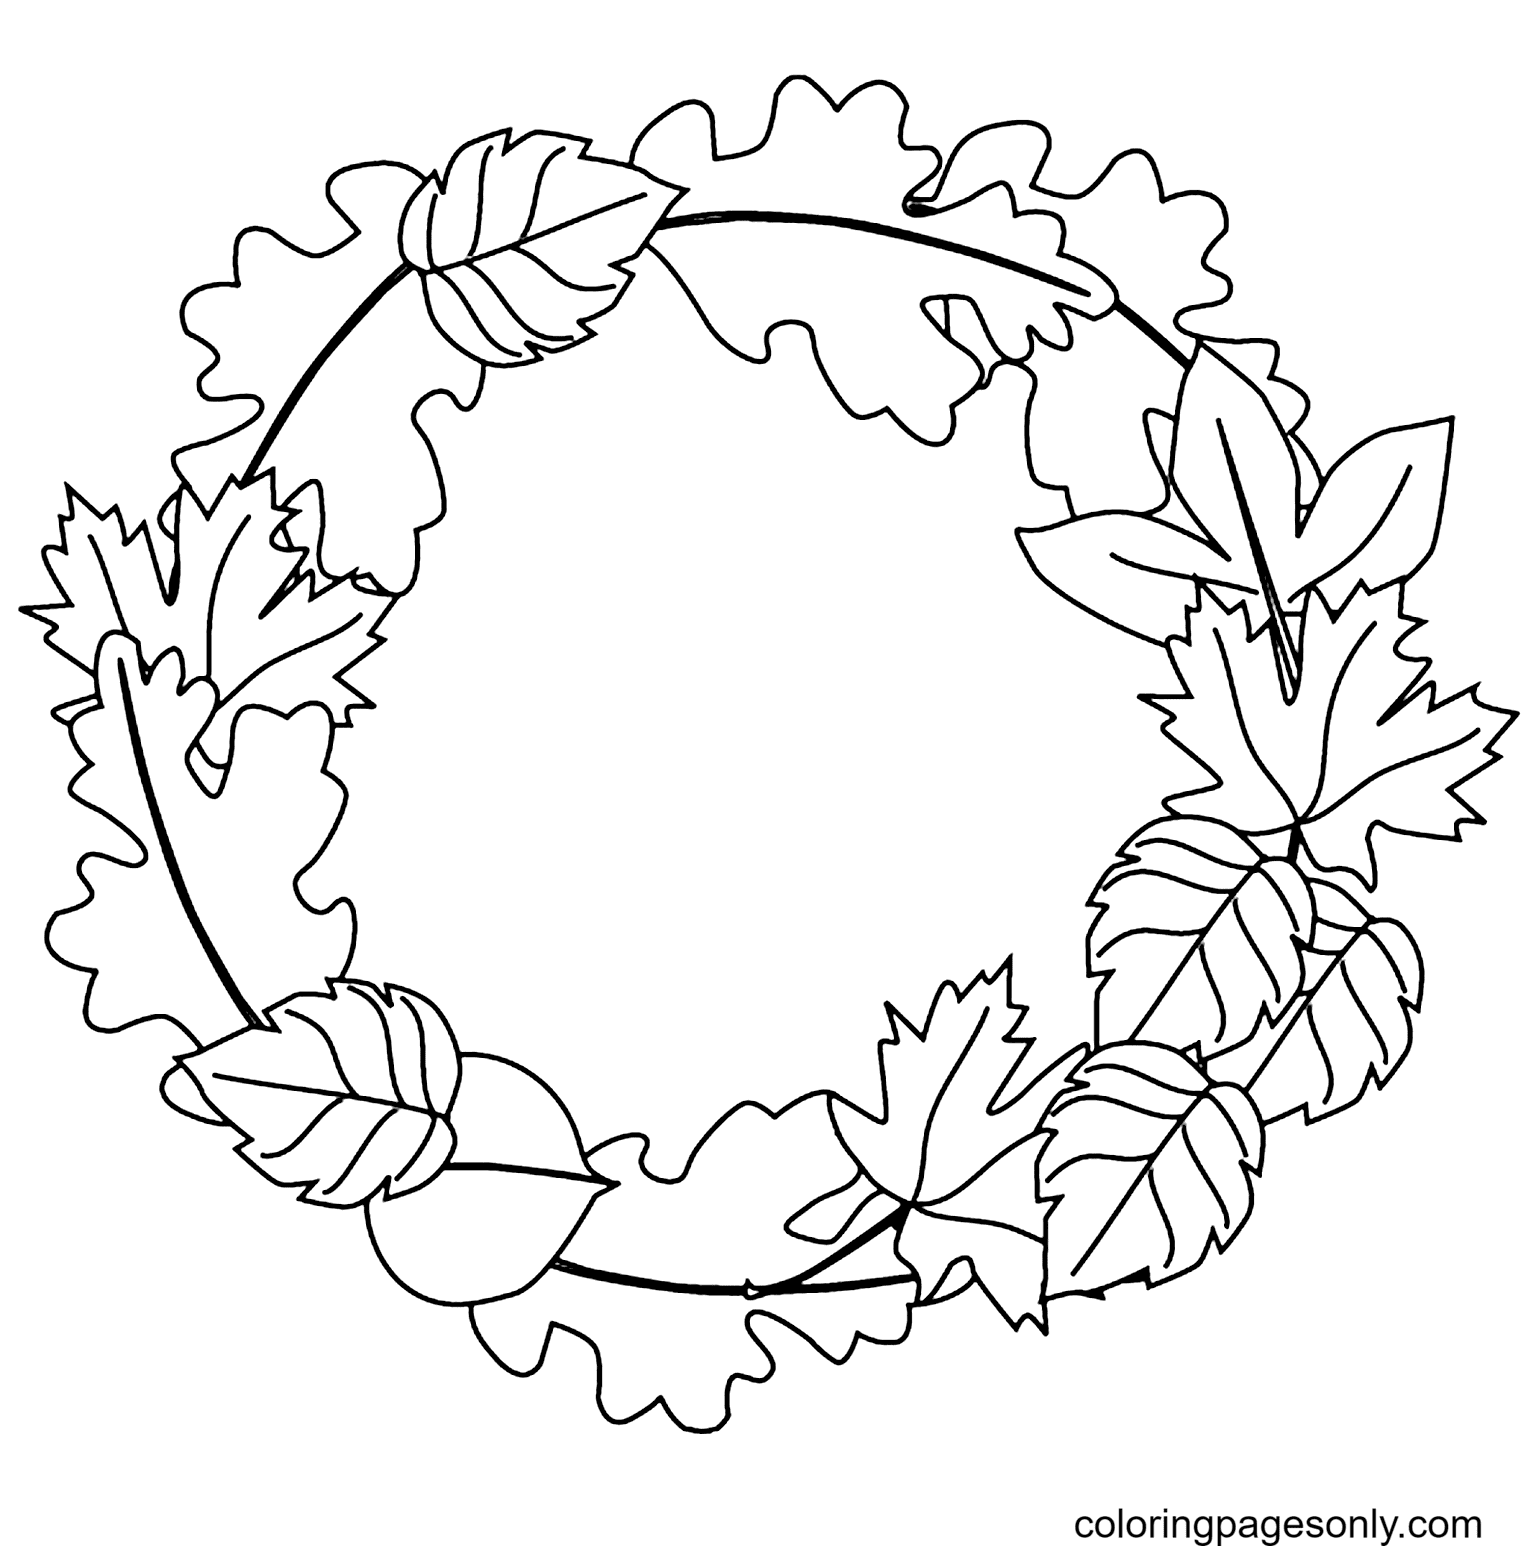 Fall Leaves Arrangement Coloring Page